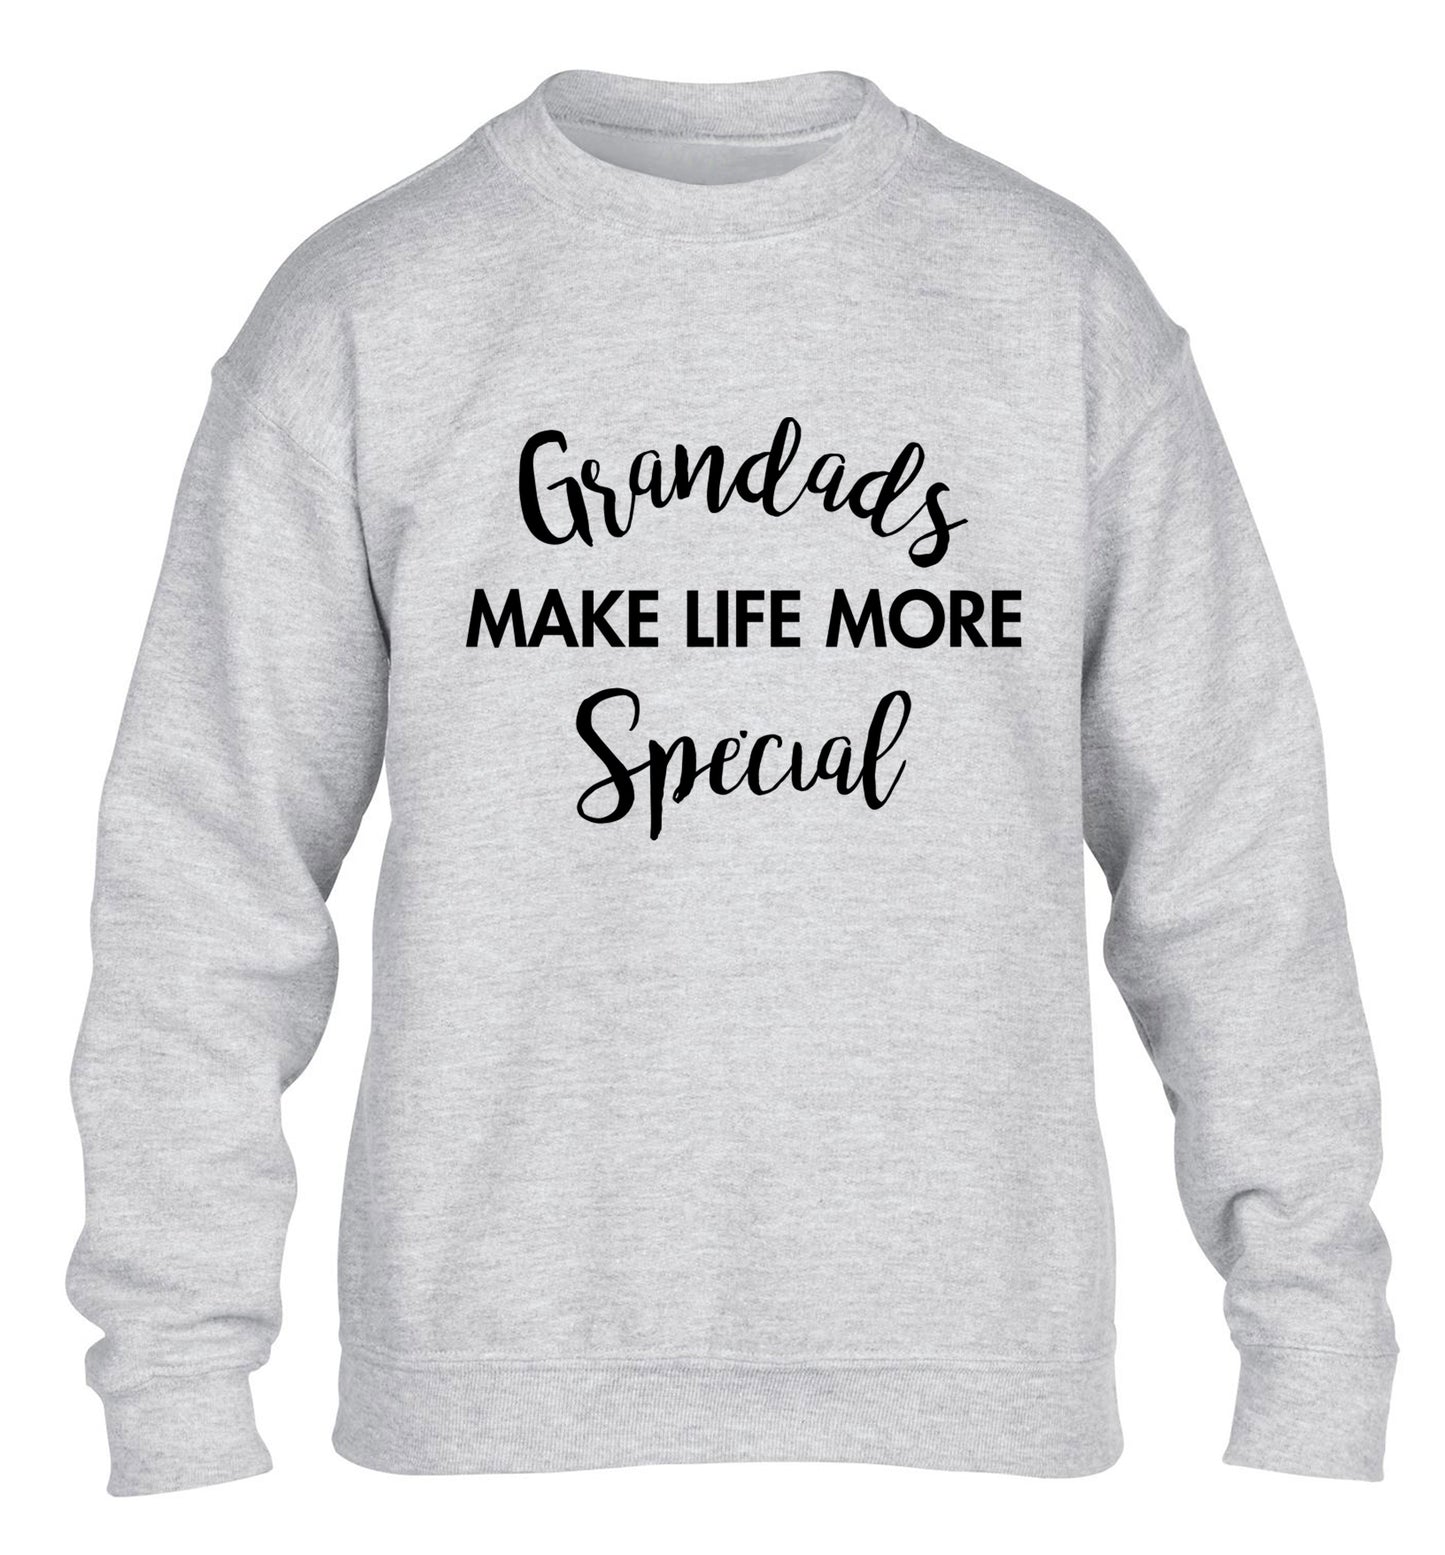 Grandads make life more special children's grey sweater 12-14 Years